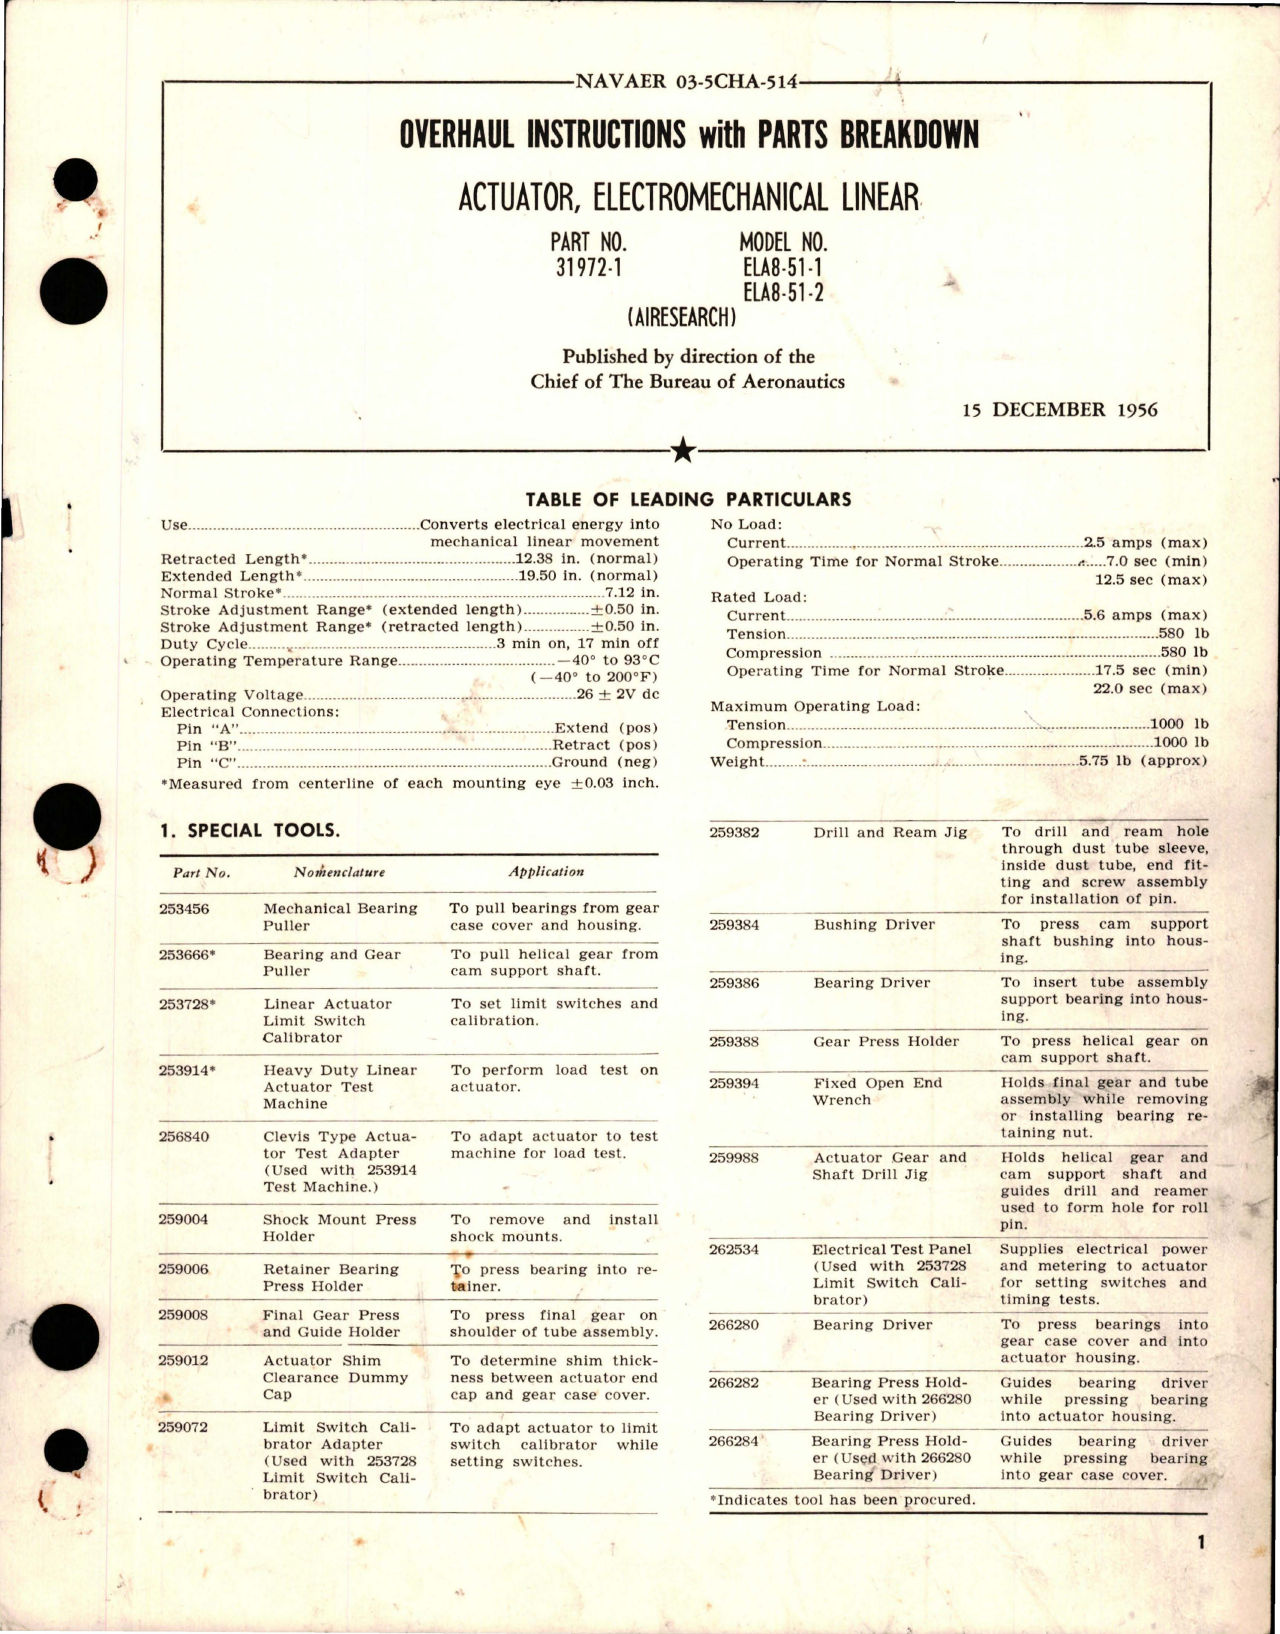 Sample page 1 from AirCorps Library document: Overhaul Instructions with Parts Breakdown for Electromechanical Linear Actuator - Part 31972-1 - Model ELA8-51-1 and ELA8-51-2